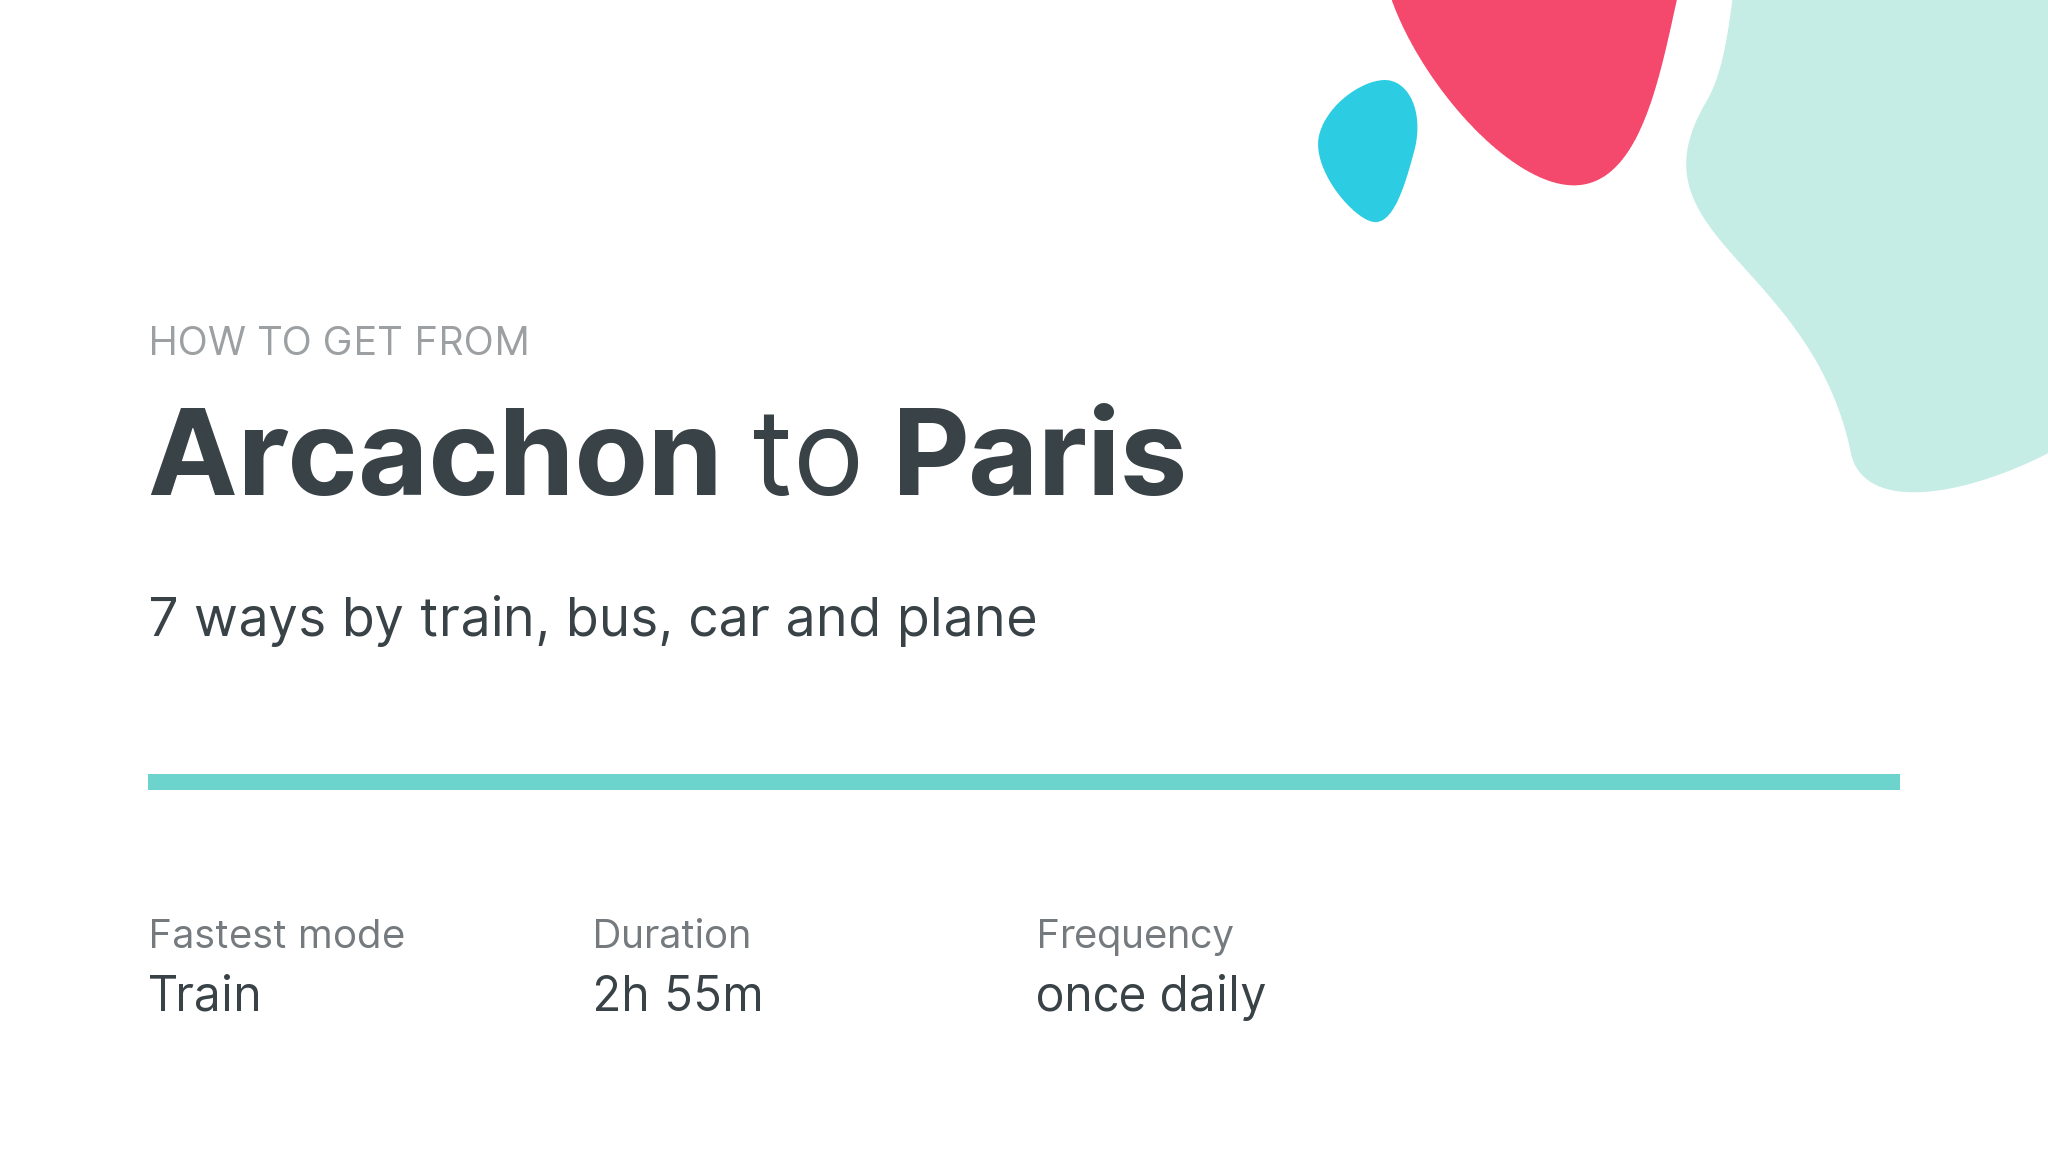 How do I get from Arcachon to Paris